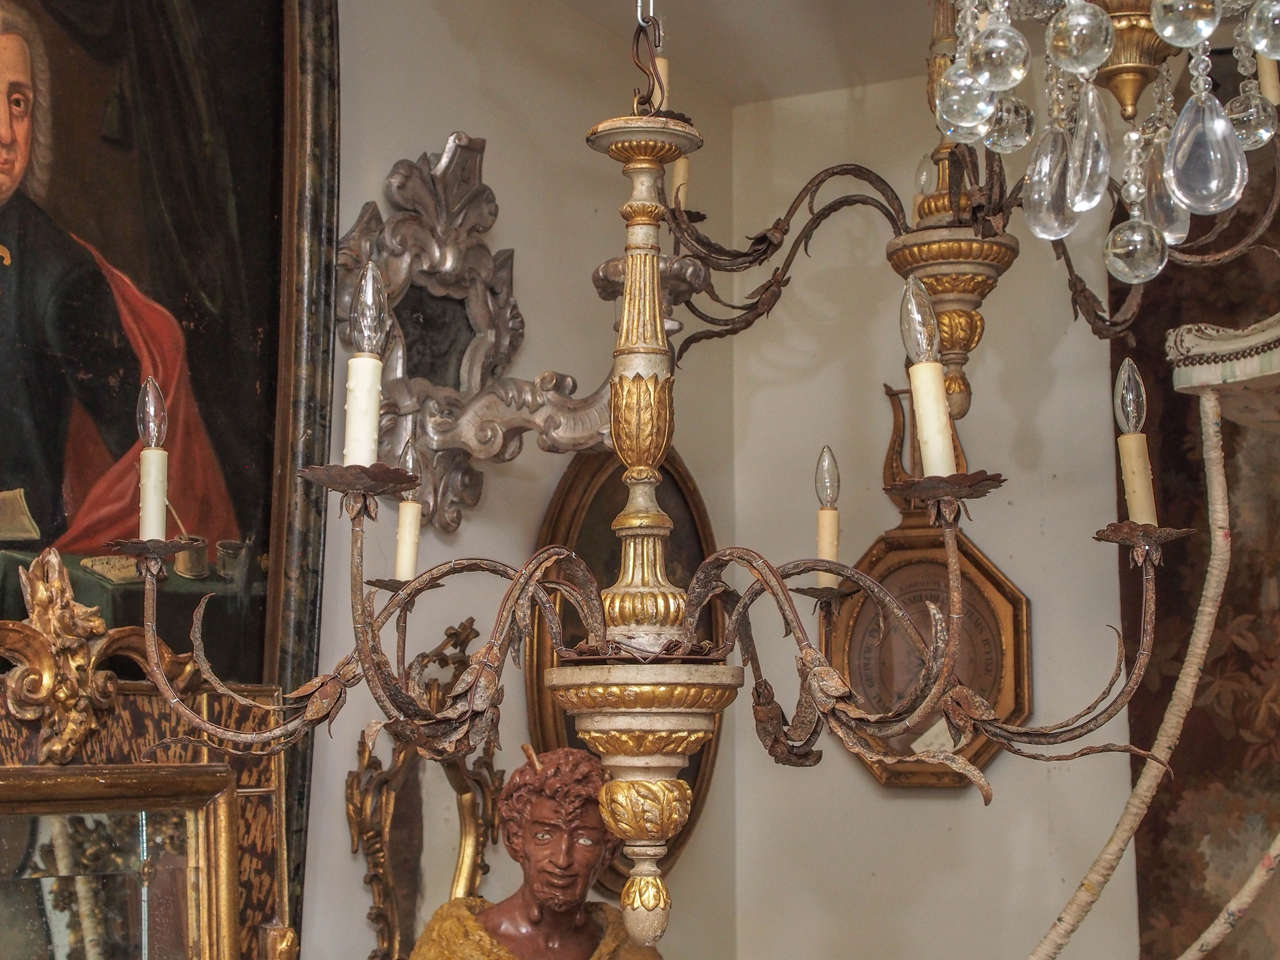 Pair of 19th century Tuscan turned stem with acanthus and ribbed detail chandelier with six iron arms. These were originally for candles and we have wired them. They are rated for 60 watt bulbs each arm. Each fixture we sell comes with chain and